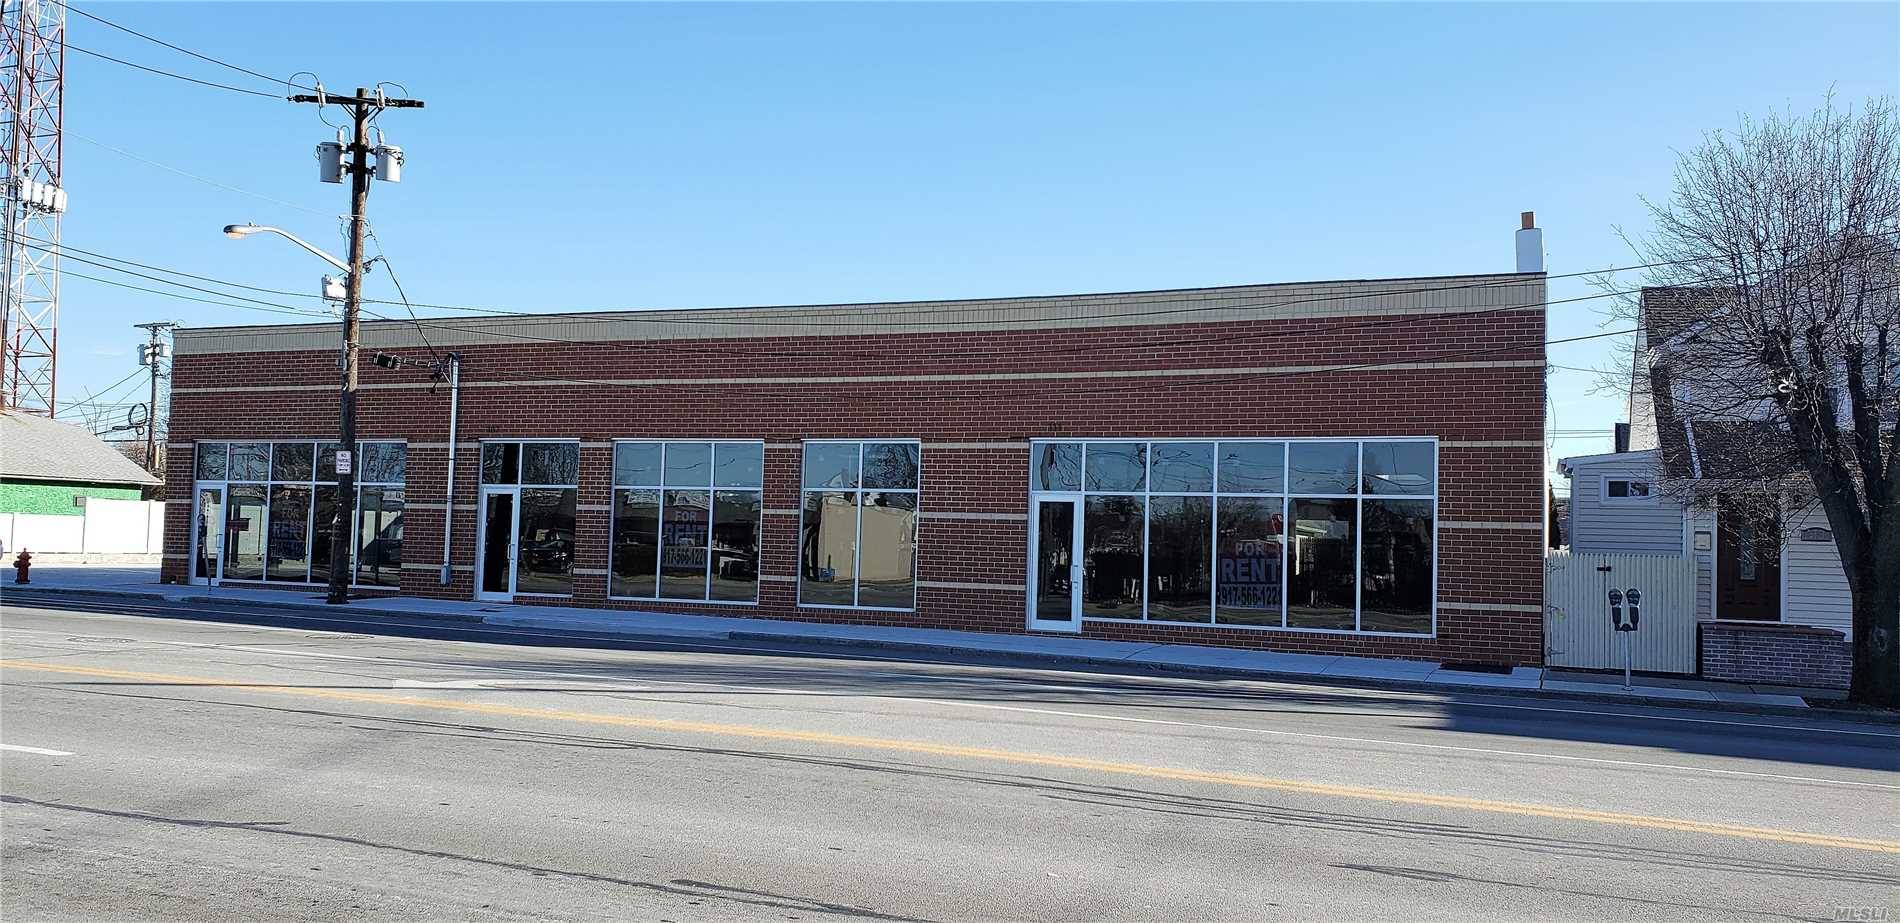 Vacant Total Renovated New Building, 13200 Sf Multi Use Commercial Building, 14 Feet High Ceiling, 150 Feet Front Jericho Tpke, Retails, Office, Any Business Show Rooms, 14 Cars Parking Lot, ...